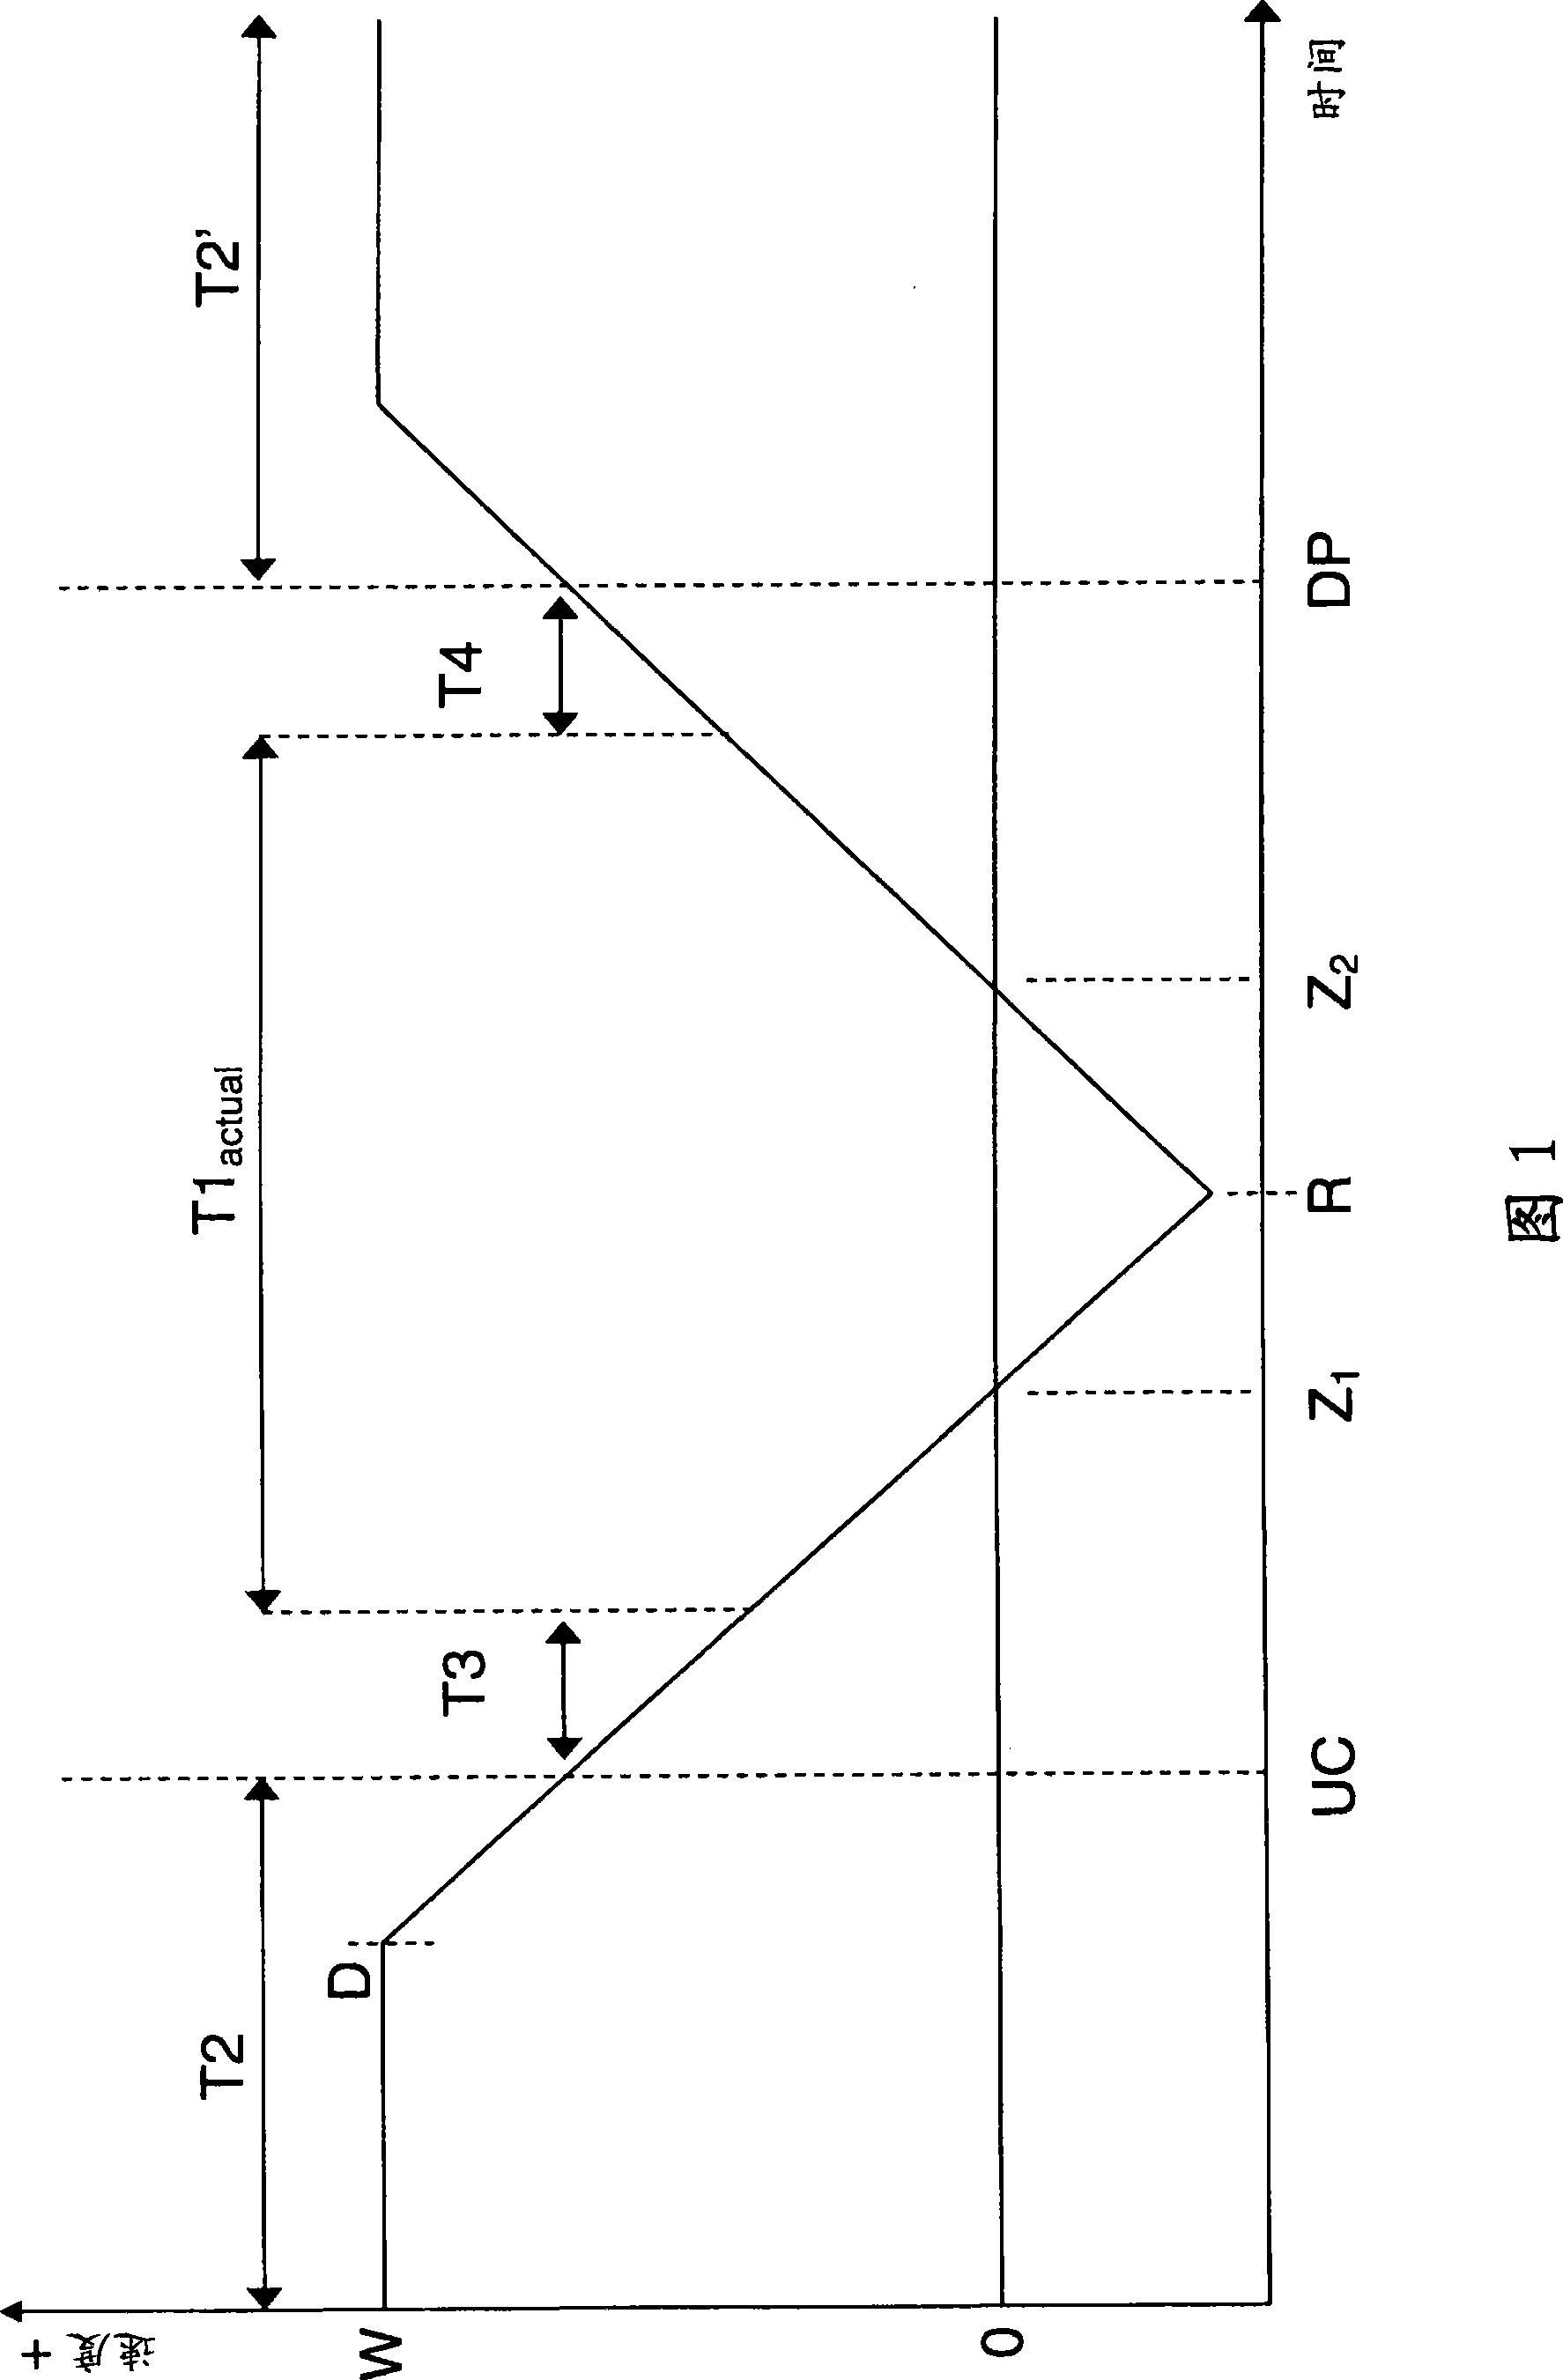 Improved method and system for operating a cyclic production machine in coordination with a loader or unloader machine